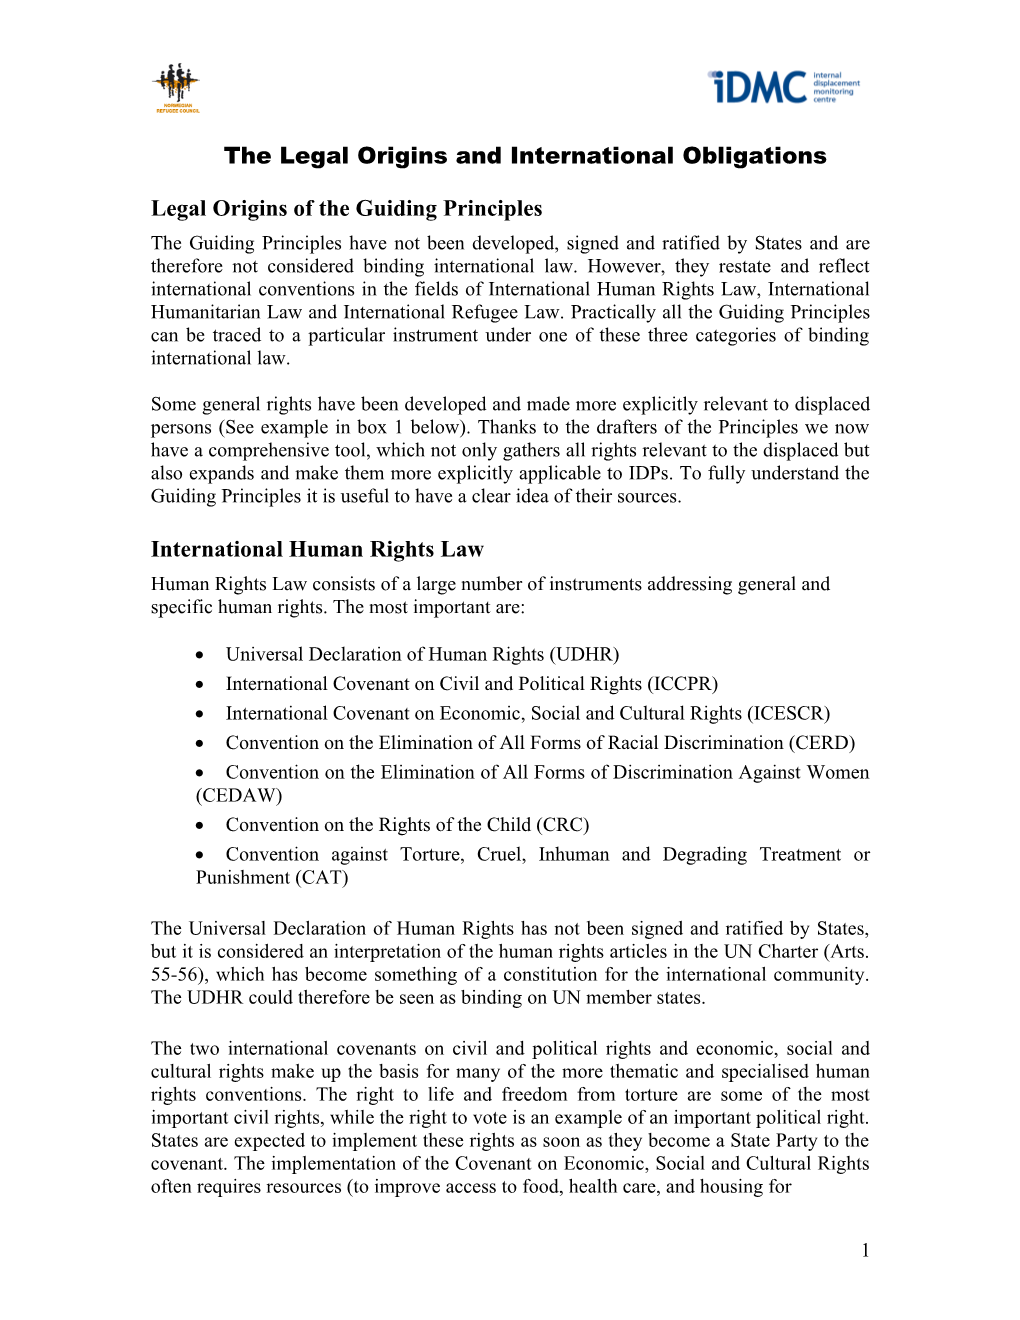 The Legal Origins and International Obligations